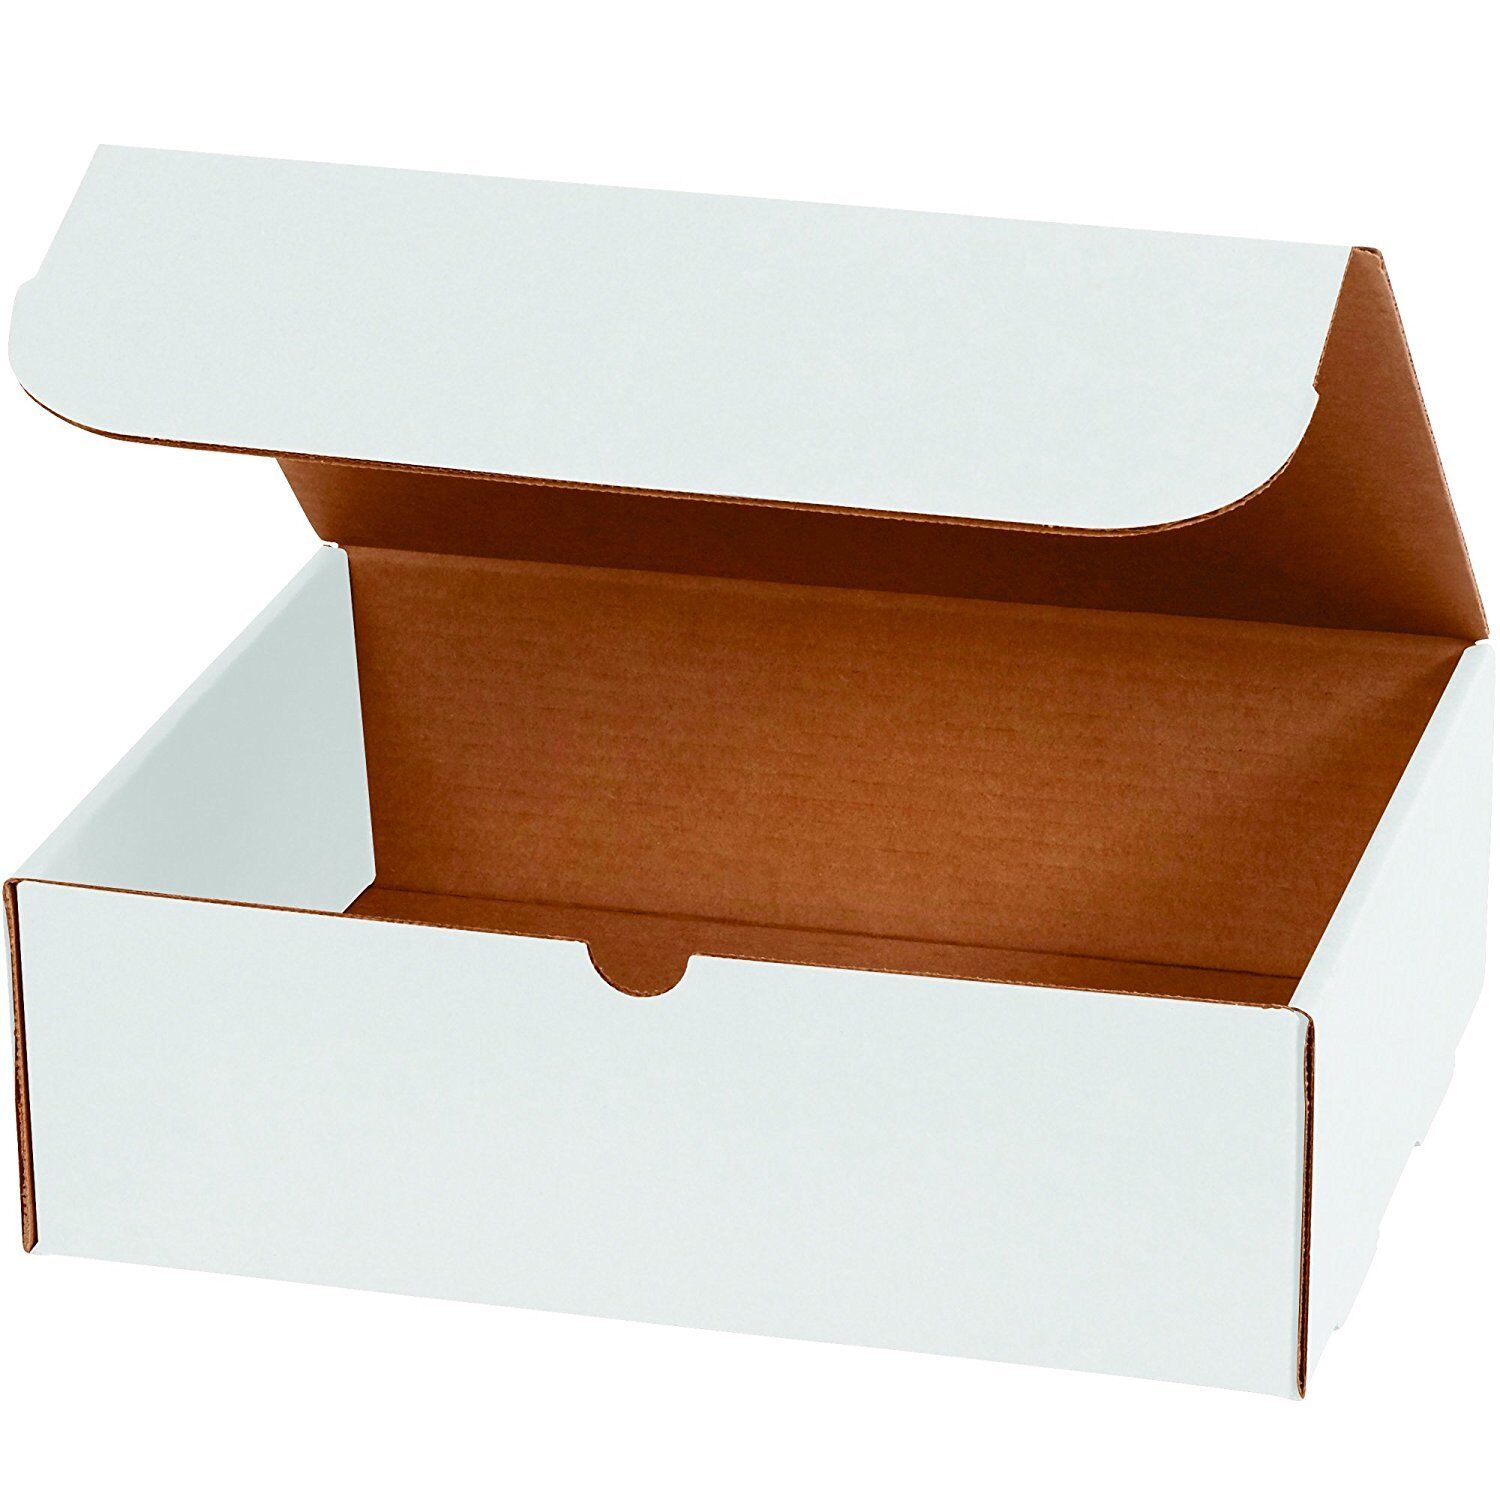 6x6x6 White Corrugated Shipping Mailers Packing Box Boxes Folding 100 To 1000